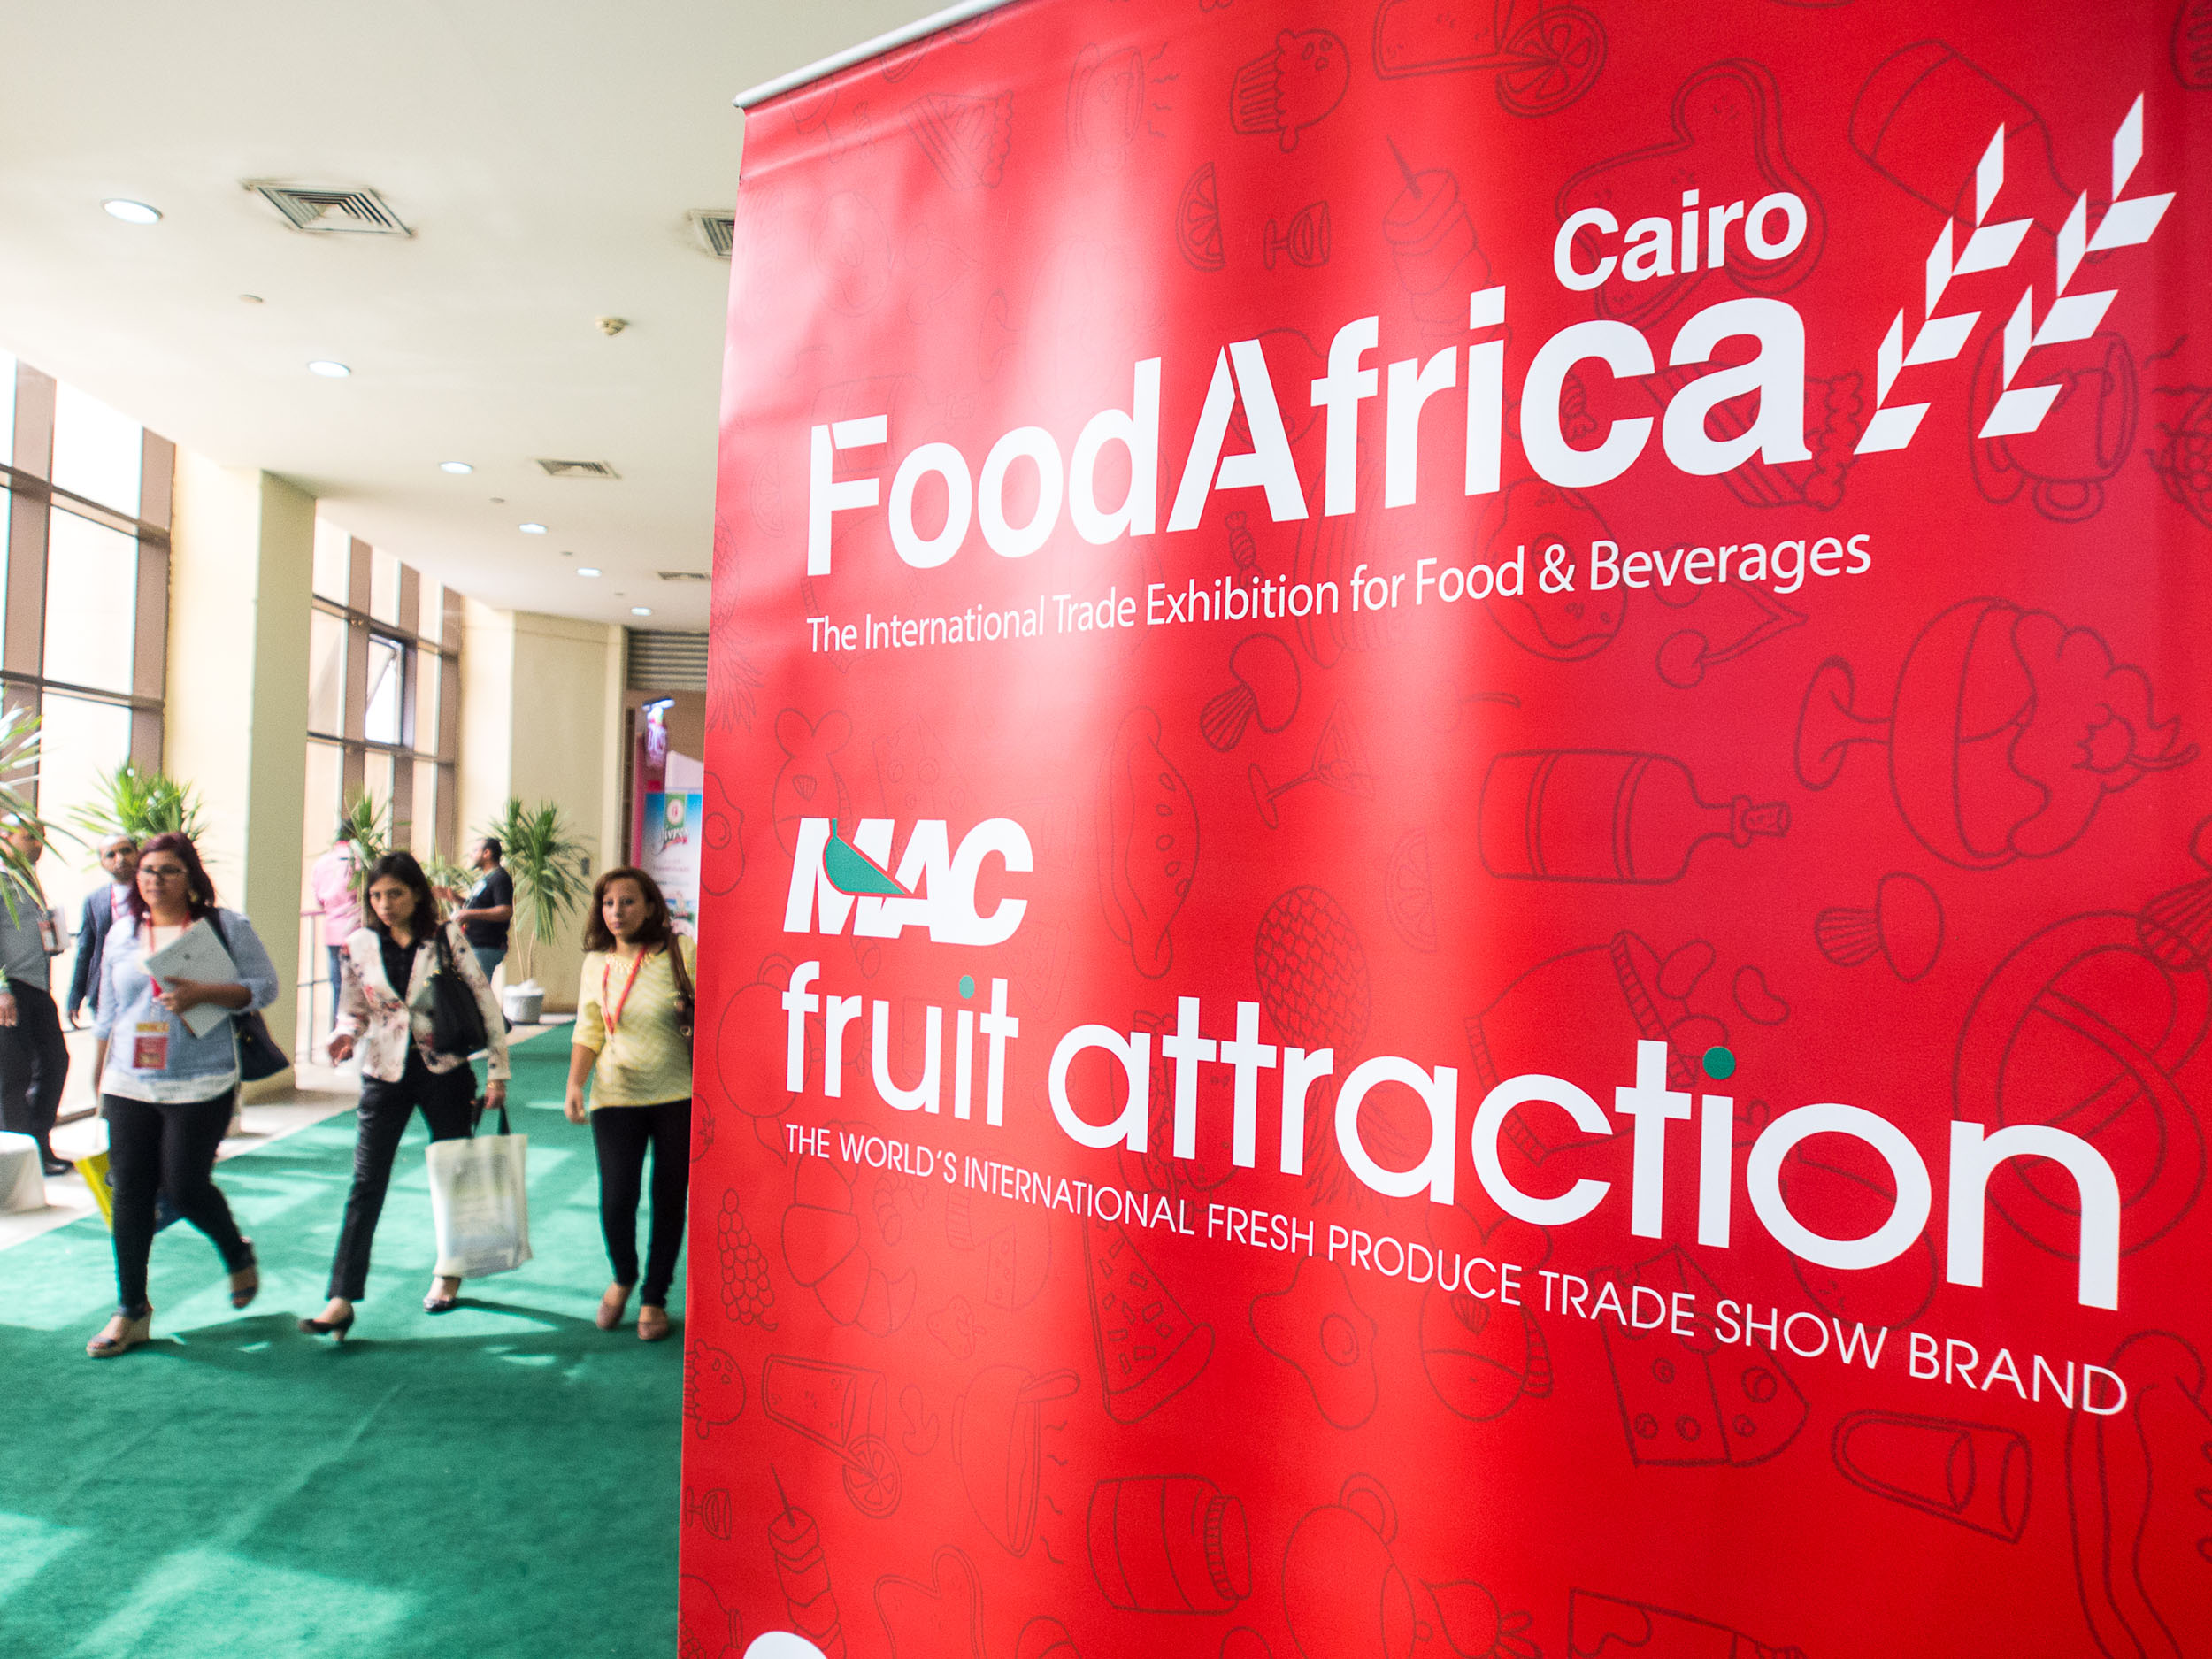 Mac Fruit Attraction organisers have decided to relaunch Mac Fruit Attraction, expanding the project to another two strategic areas for the sector: South America and Asia.